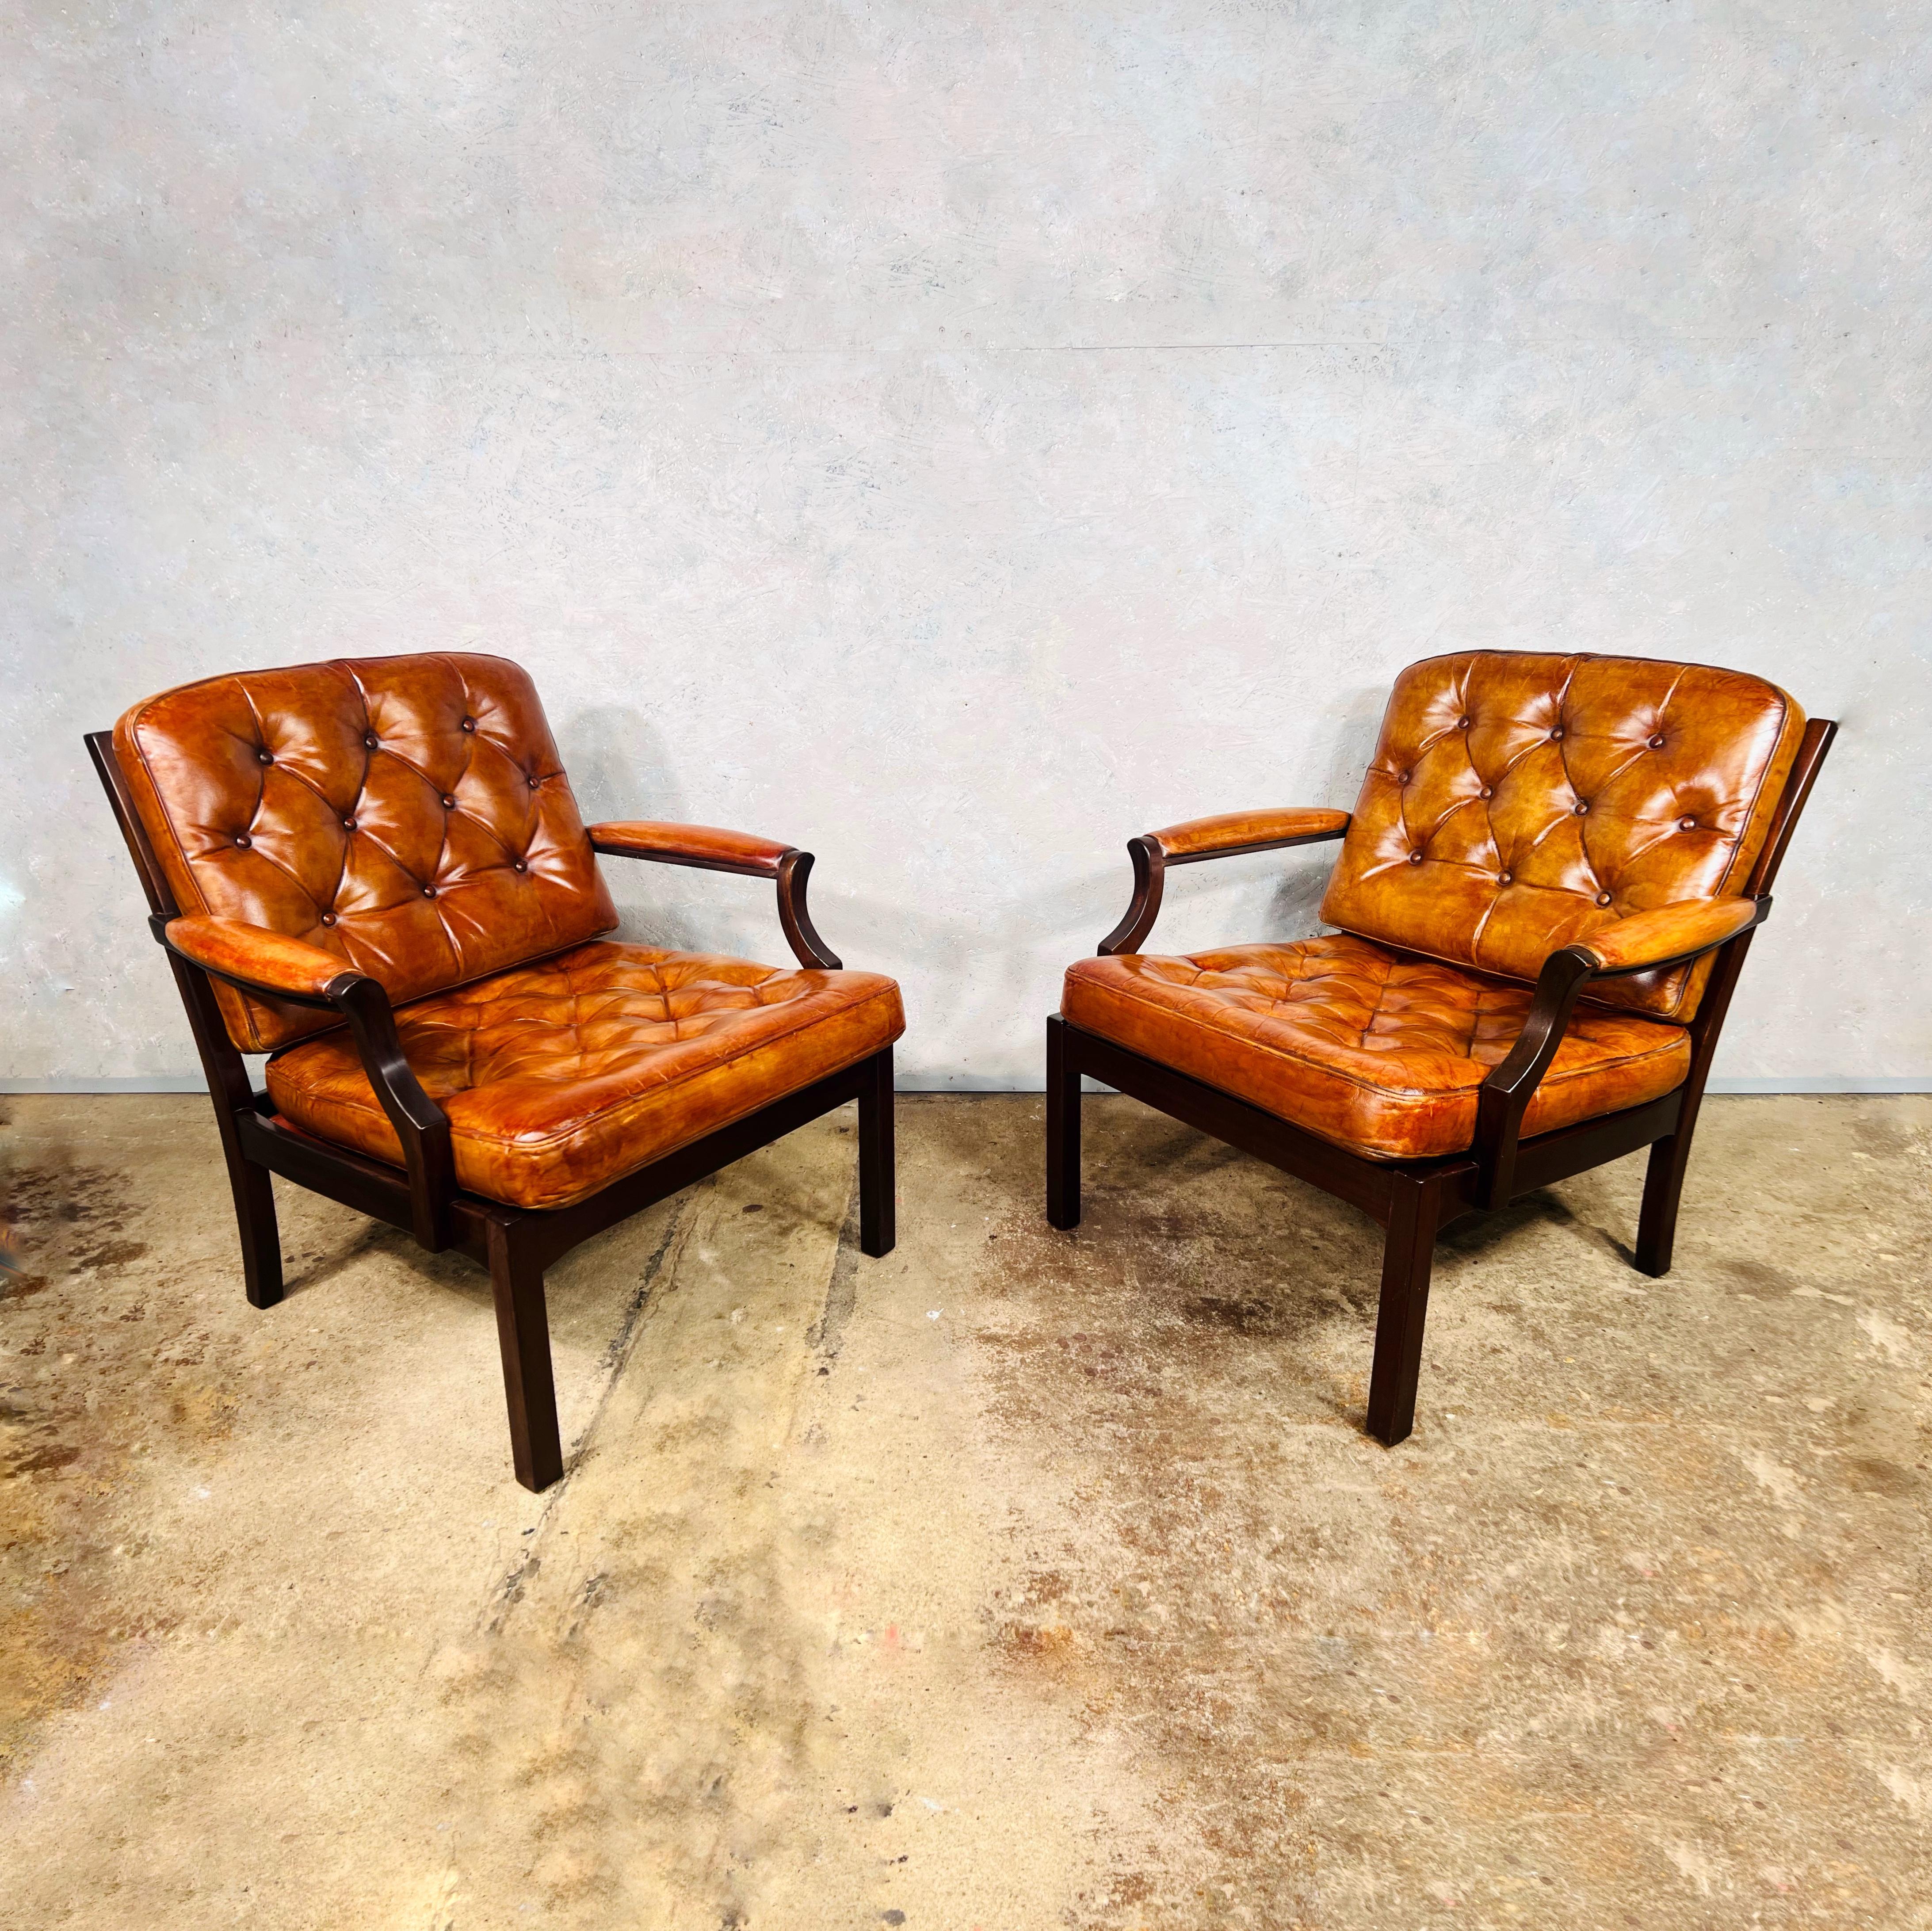 An elegant pair of vintage danish leather armchairs, with fully buttoned cushions and a solid beech frame 

Great design, very comfortable to sit in, compact and neat proportions.

The leather is hand dyed a most beautiful light tan colour and